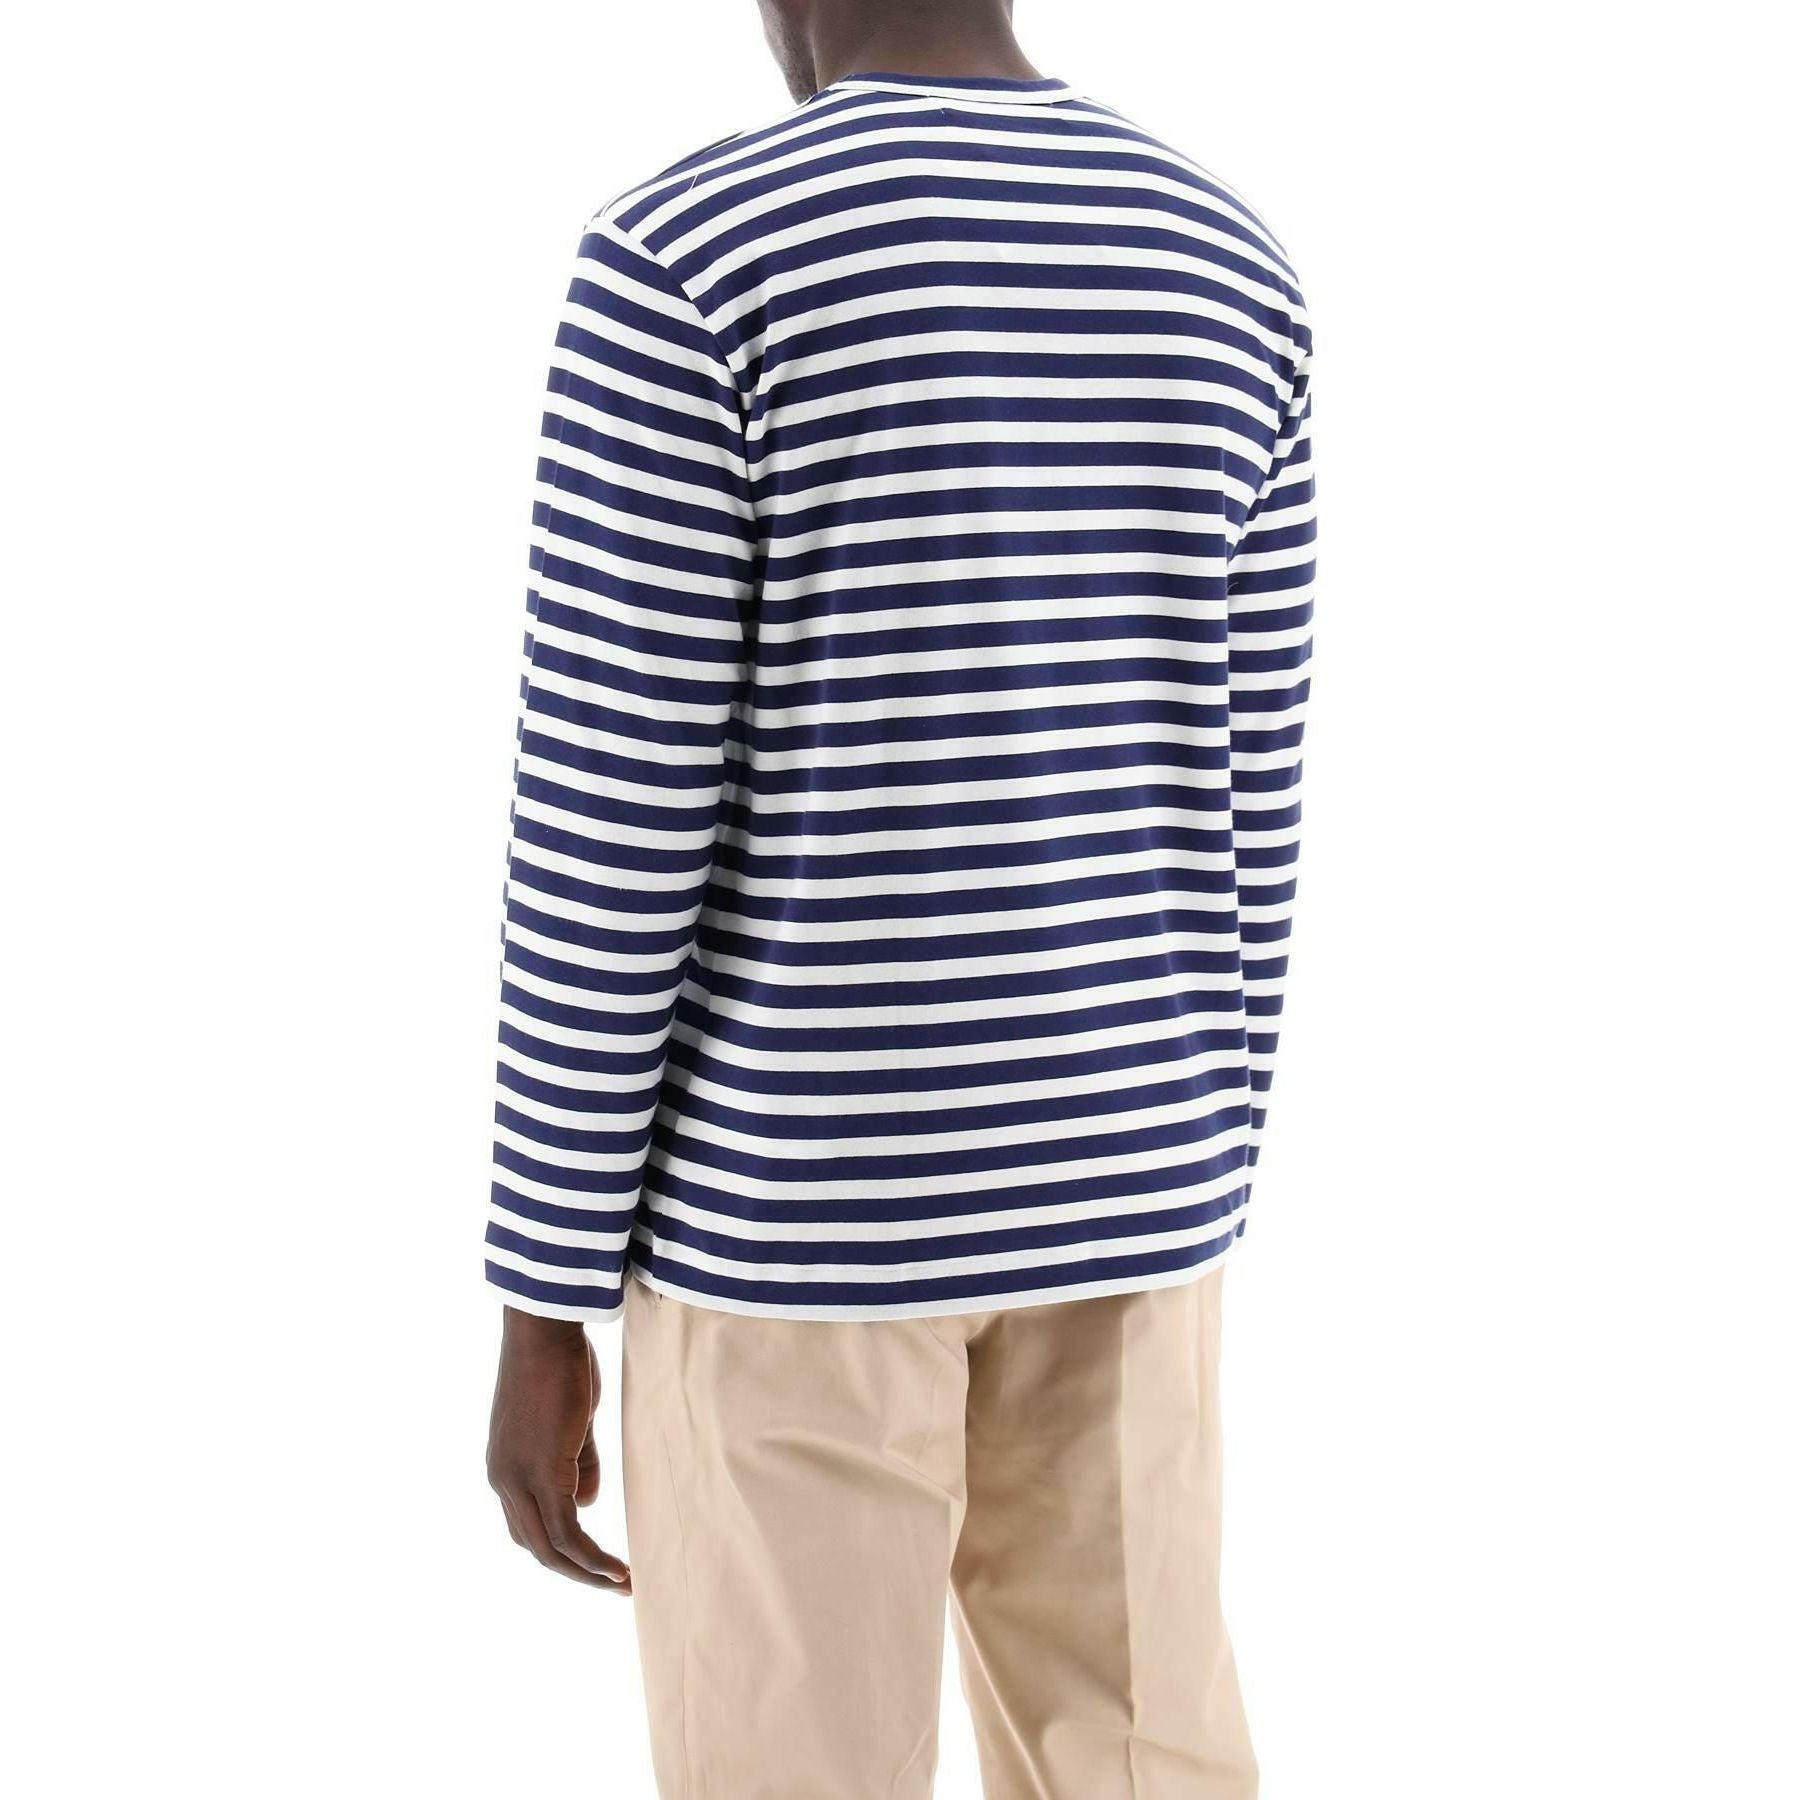 White Striped Long Sleeved T-Shirt With Heart Logo Patch COMME DES GARCONS PLAY JOHN JULIA.